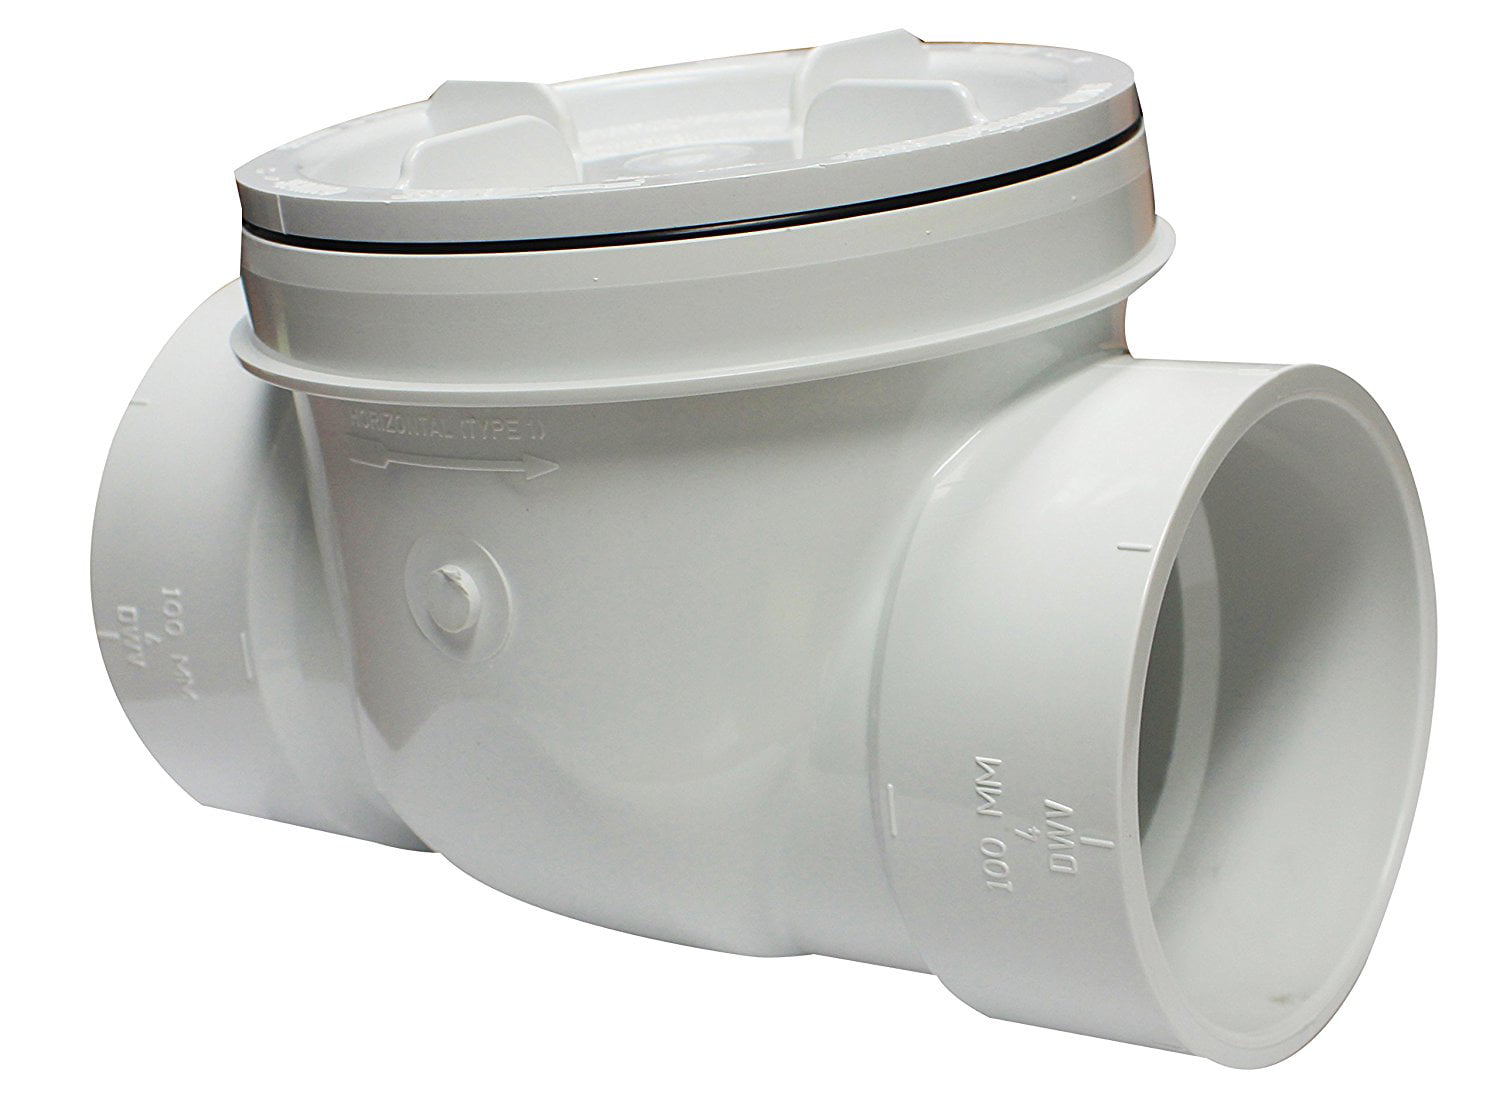 Canplas 223284W PVC Backwater Valve, 4Inch, Protection against the backflow of sewage and storm